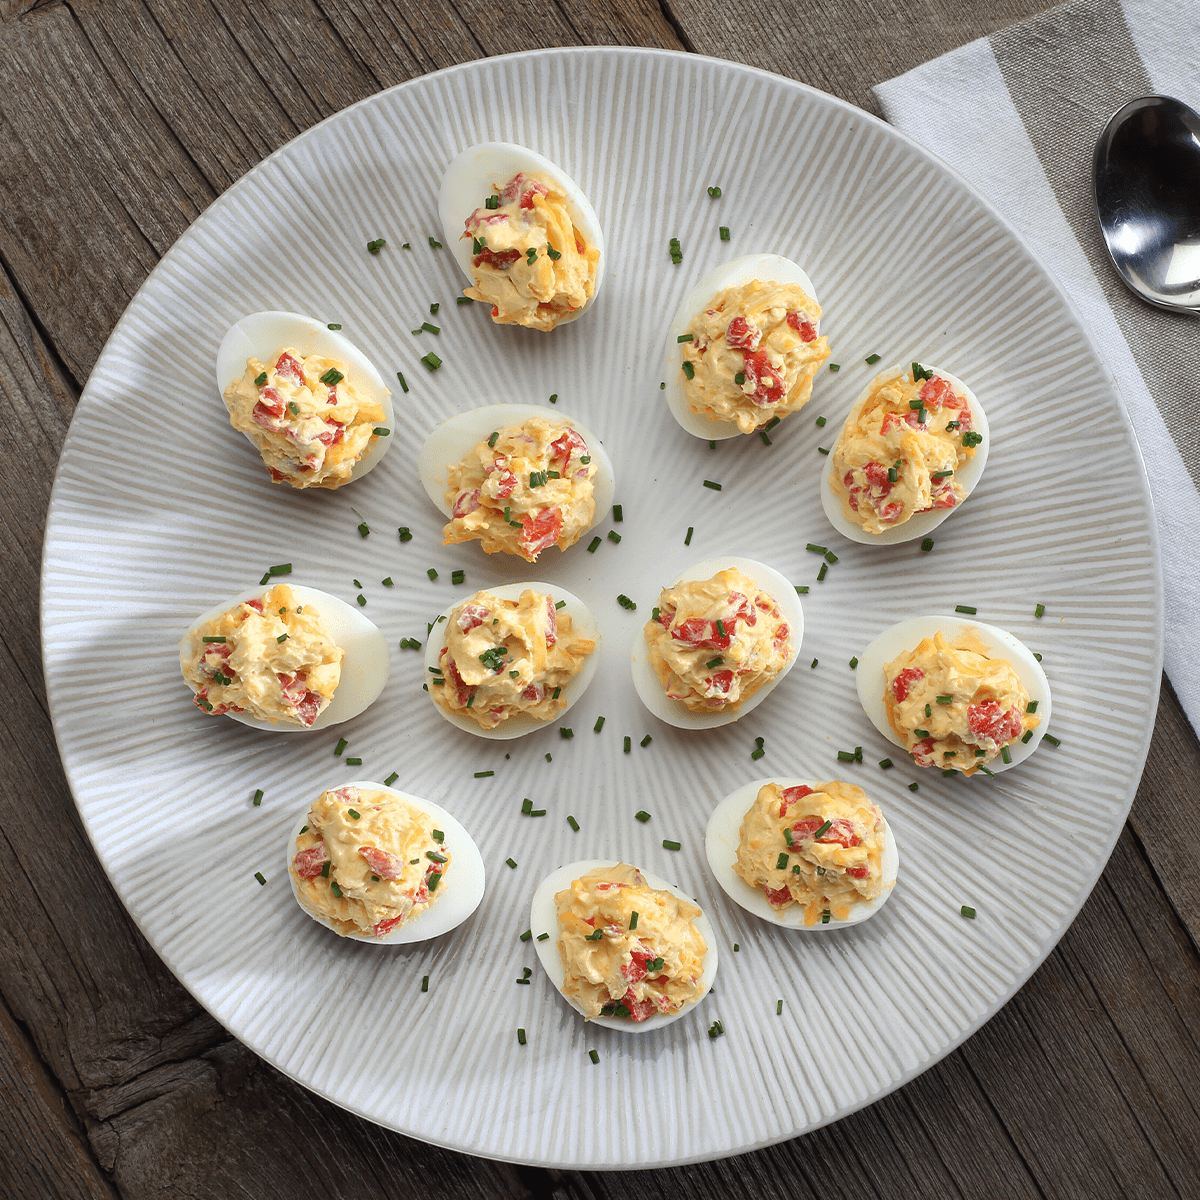 Pimento cheese makes these deviled eggs taste like they fell straight from heaven. bit.ly/3Jp88nw